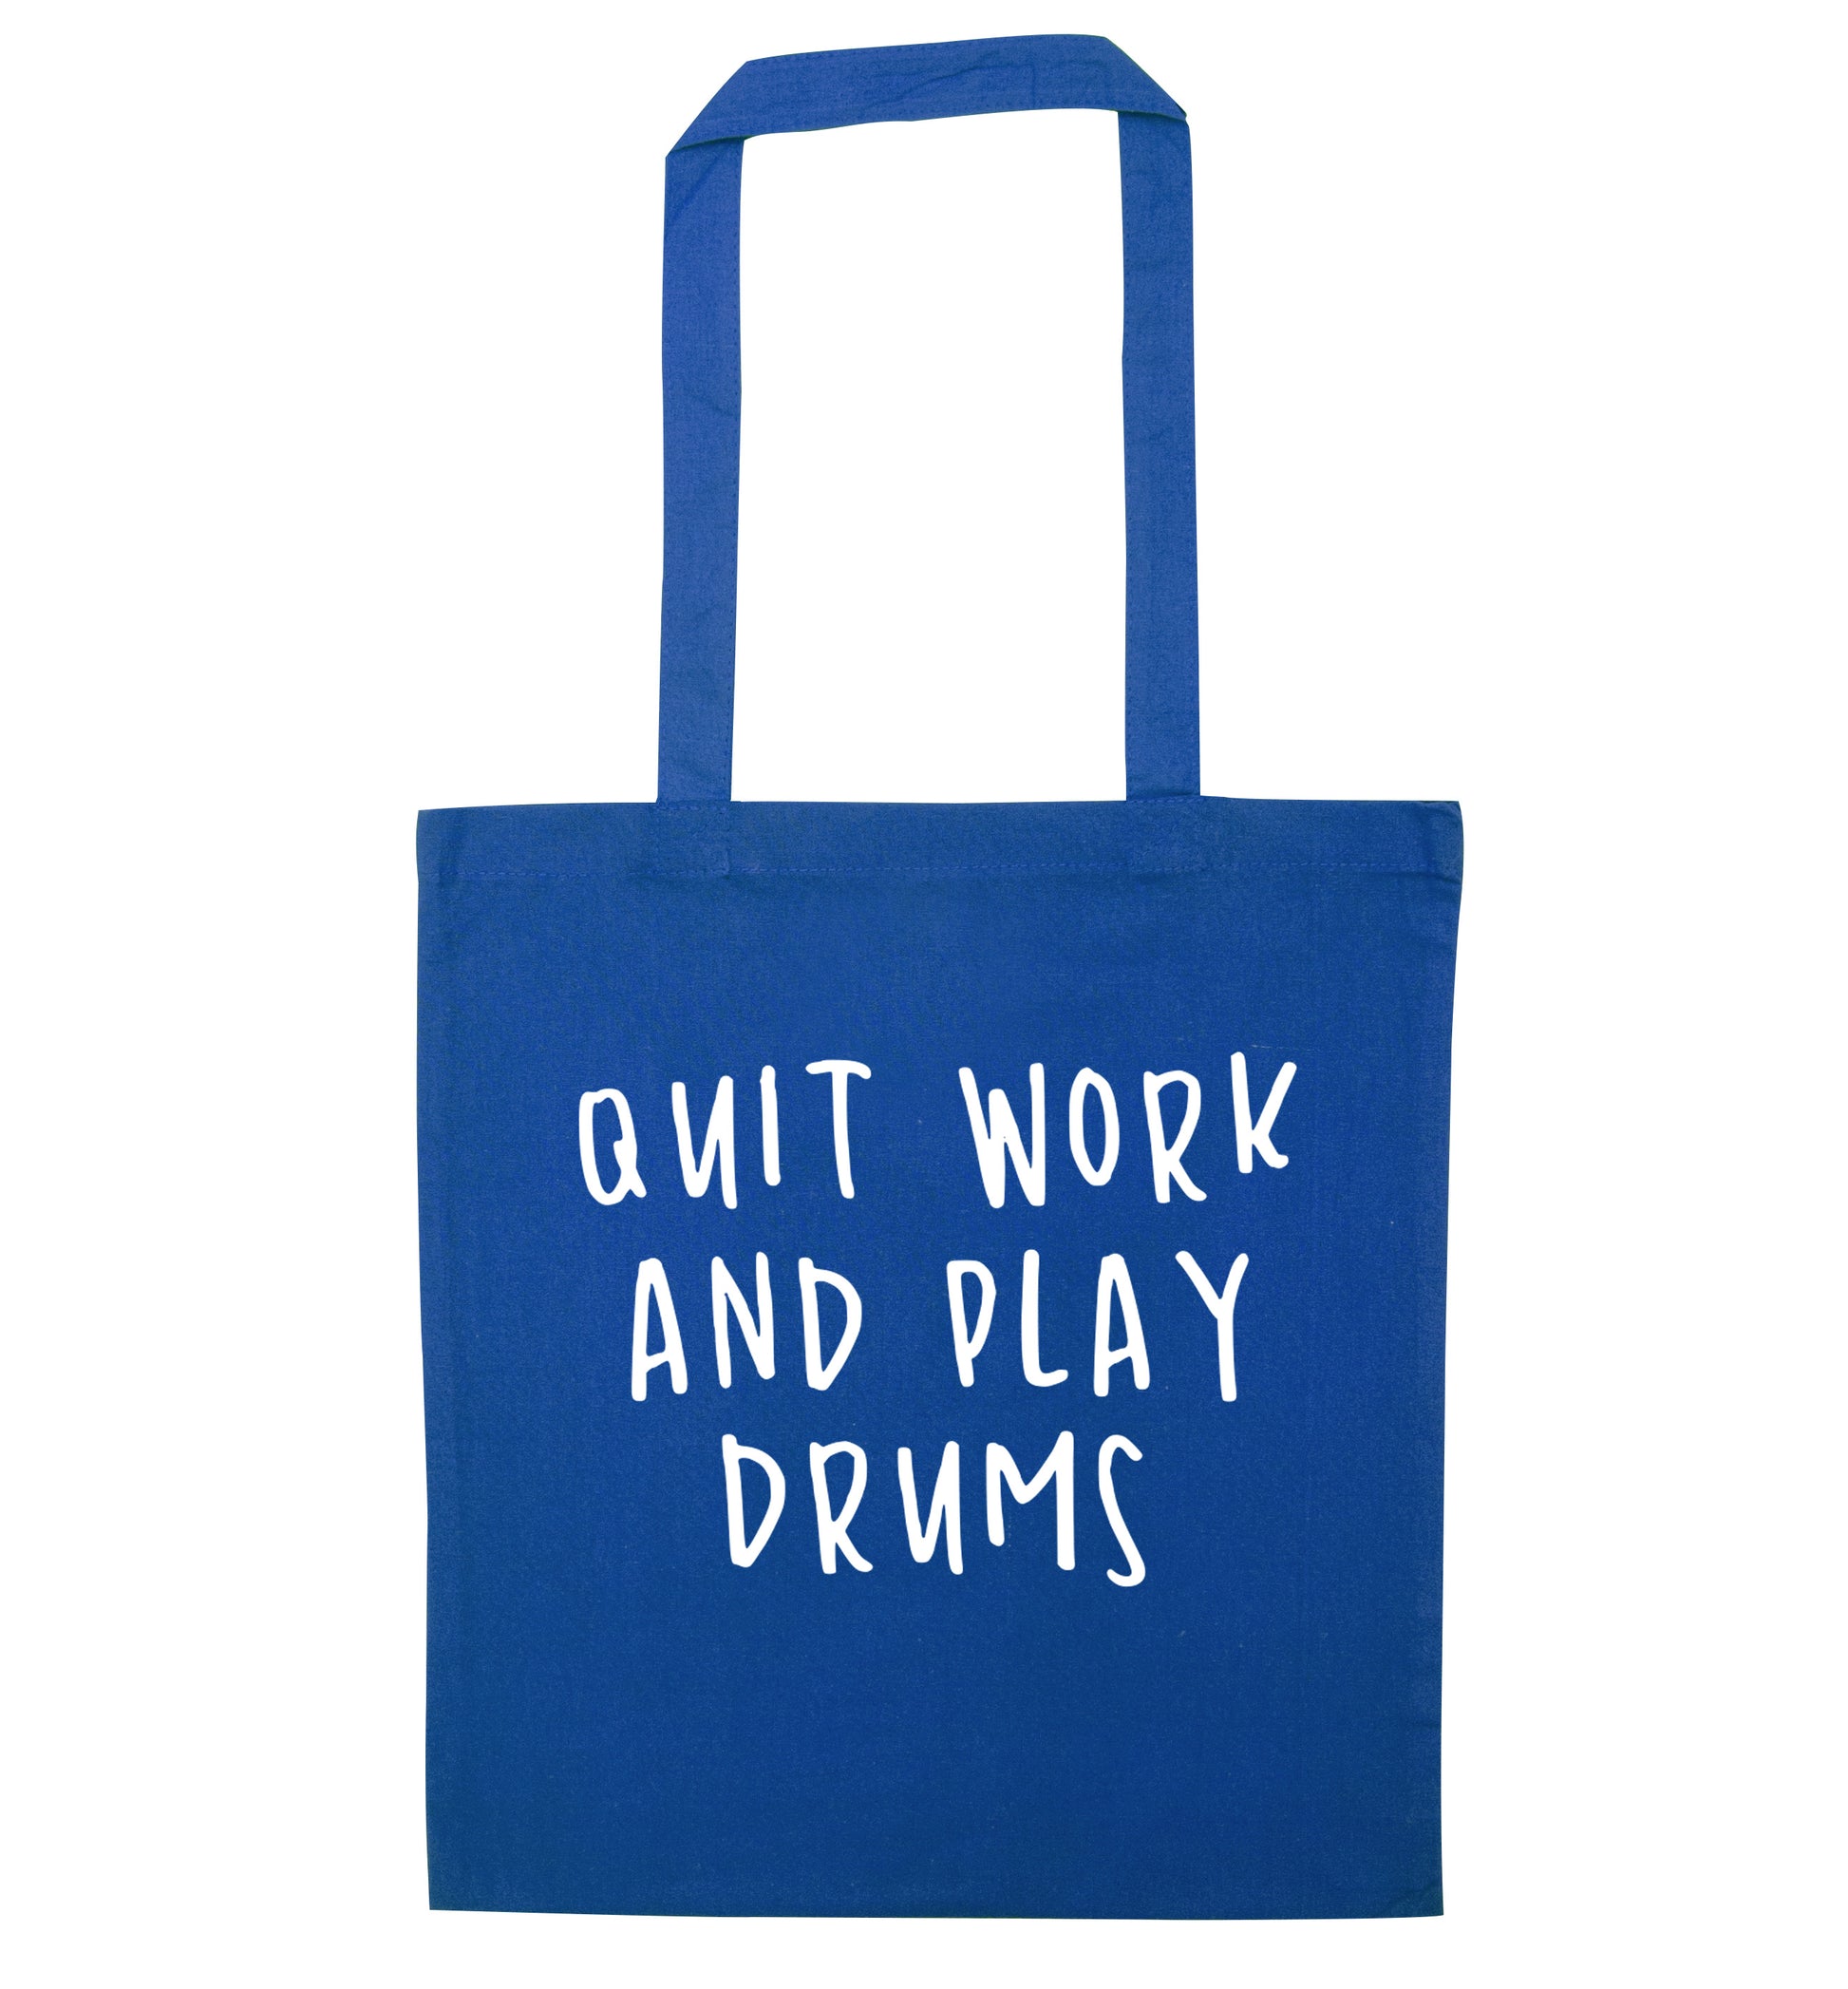 Quit work and play drums blue tote bag